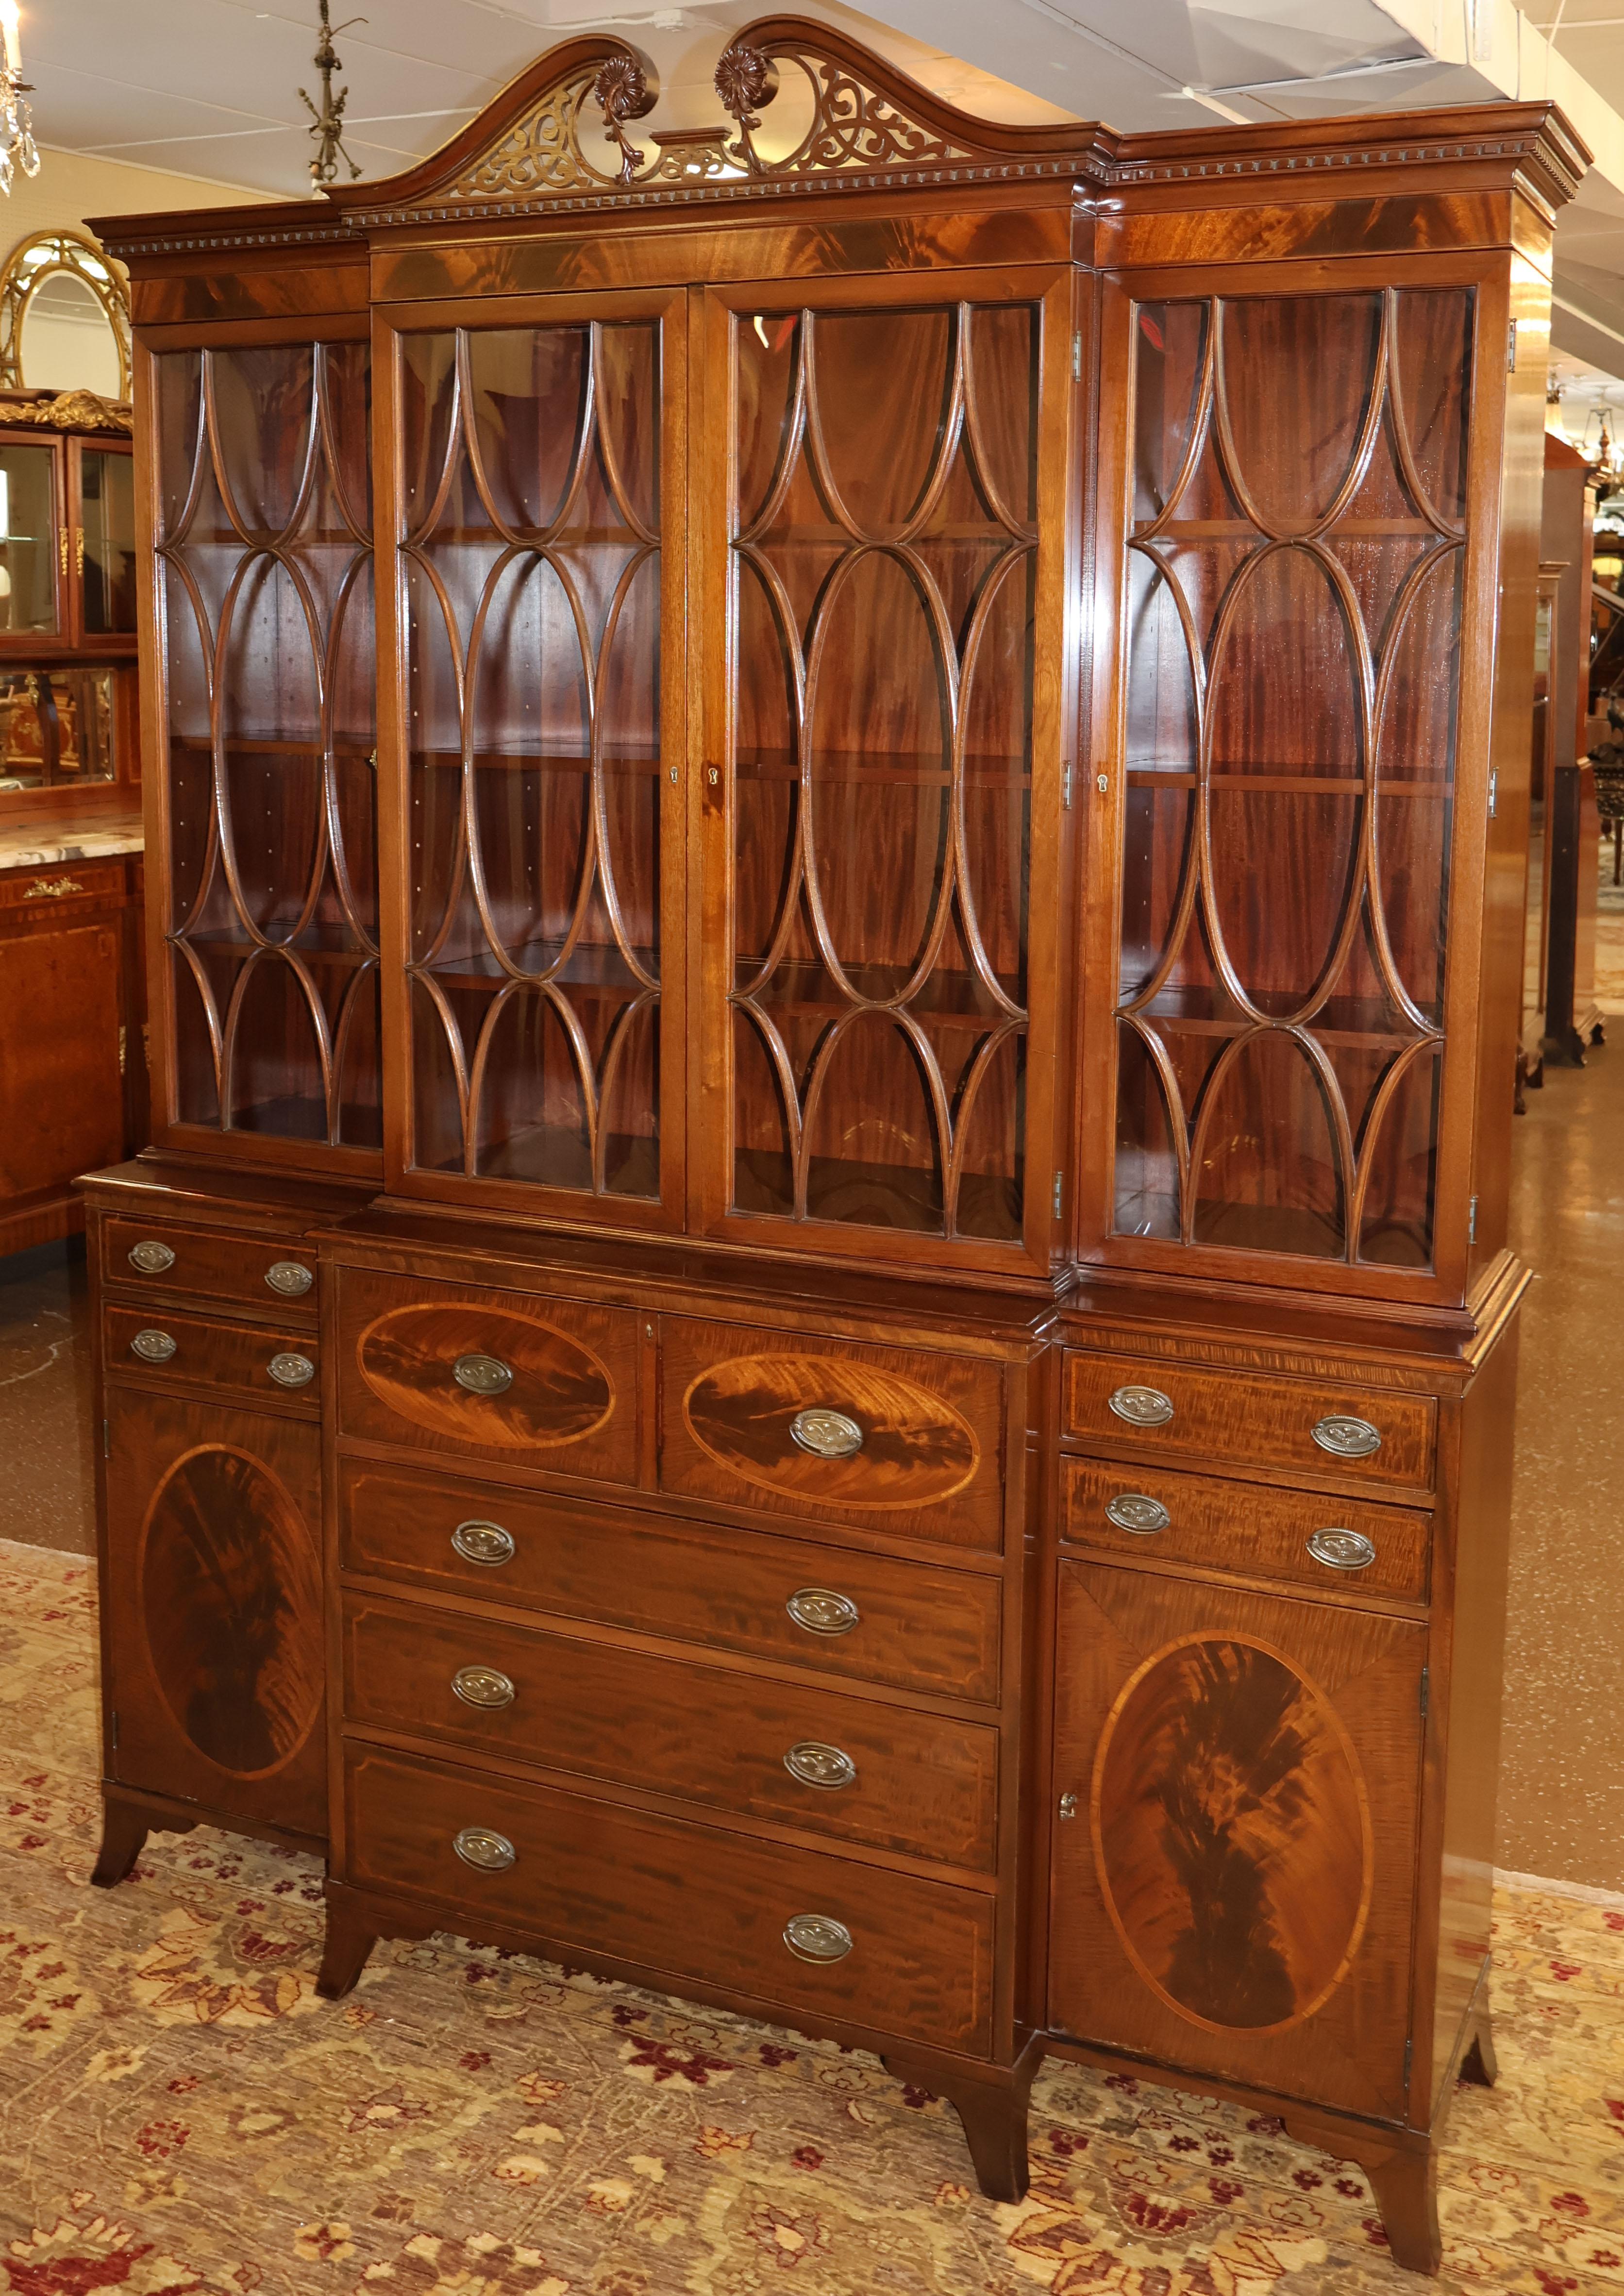 Gorgeous Early 20th Century Flame Mahogany Cabinet Bookcase Breakfront By Warsaw

Dimensions : 88